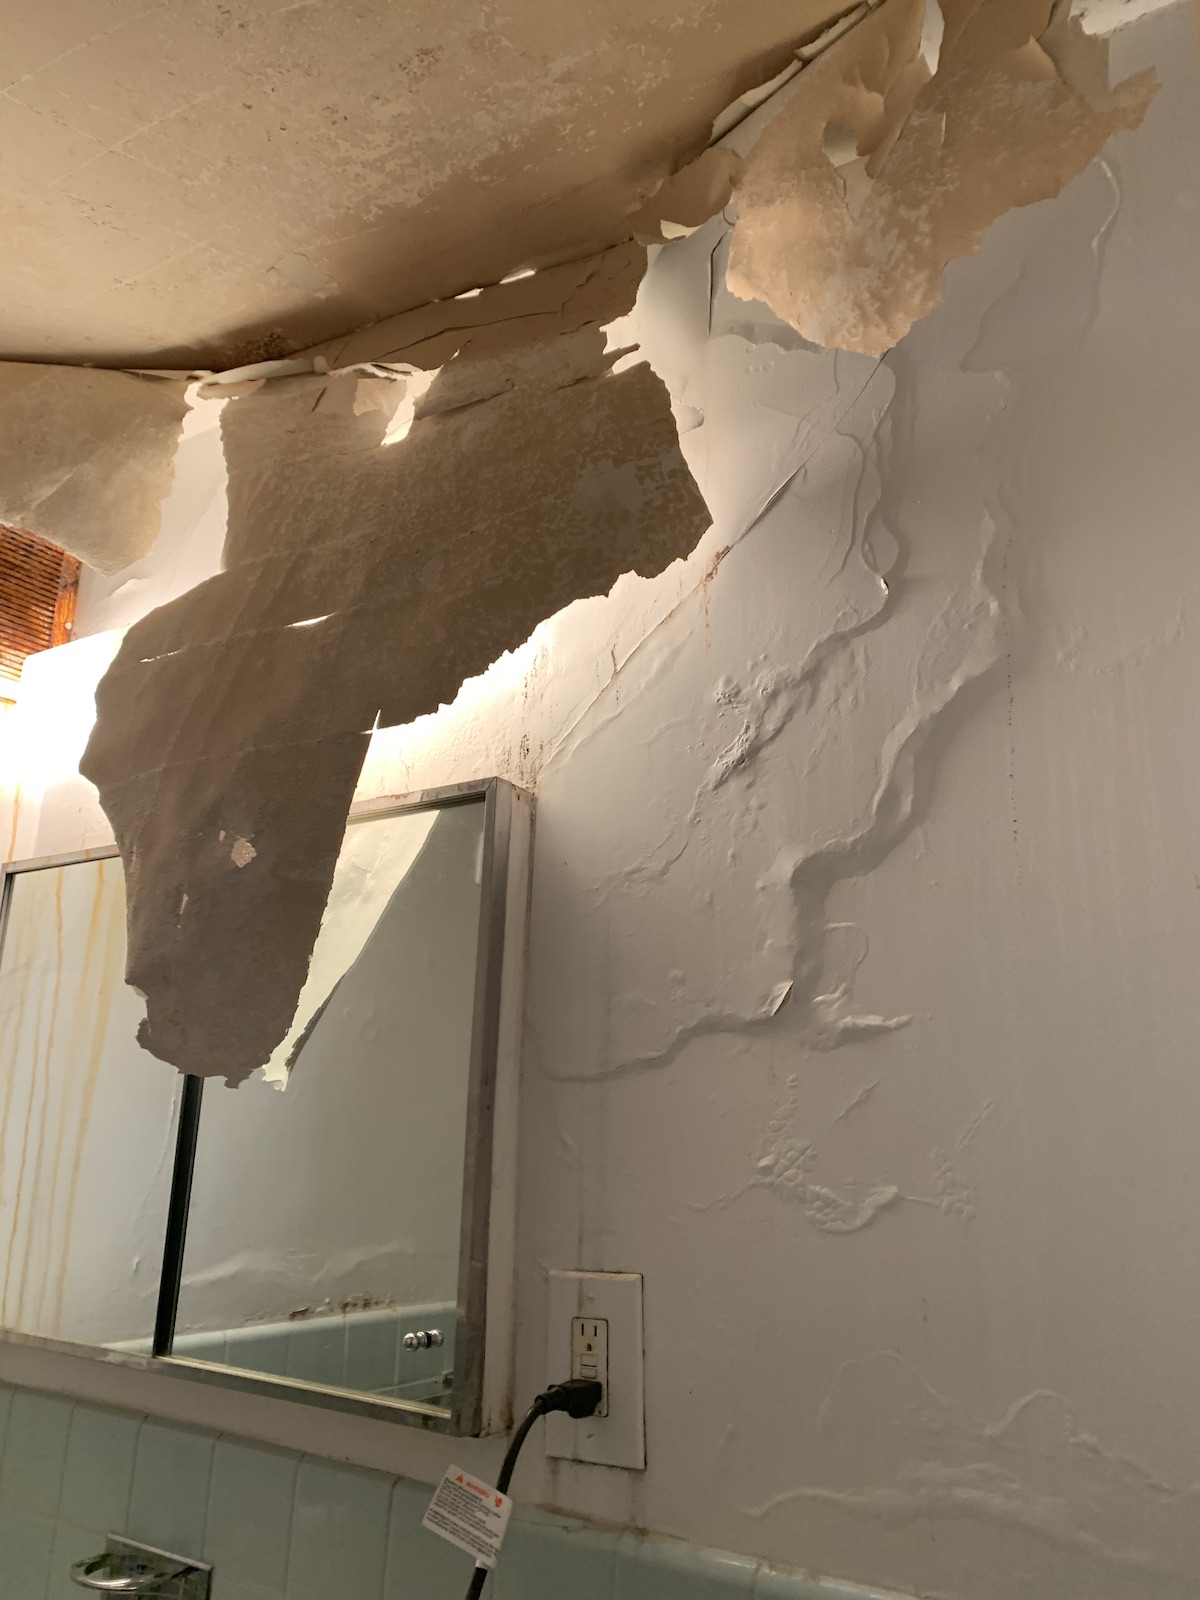 damage caused by mold on the walls and ceilings